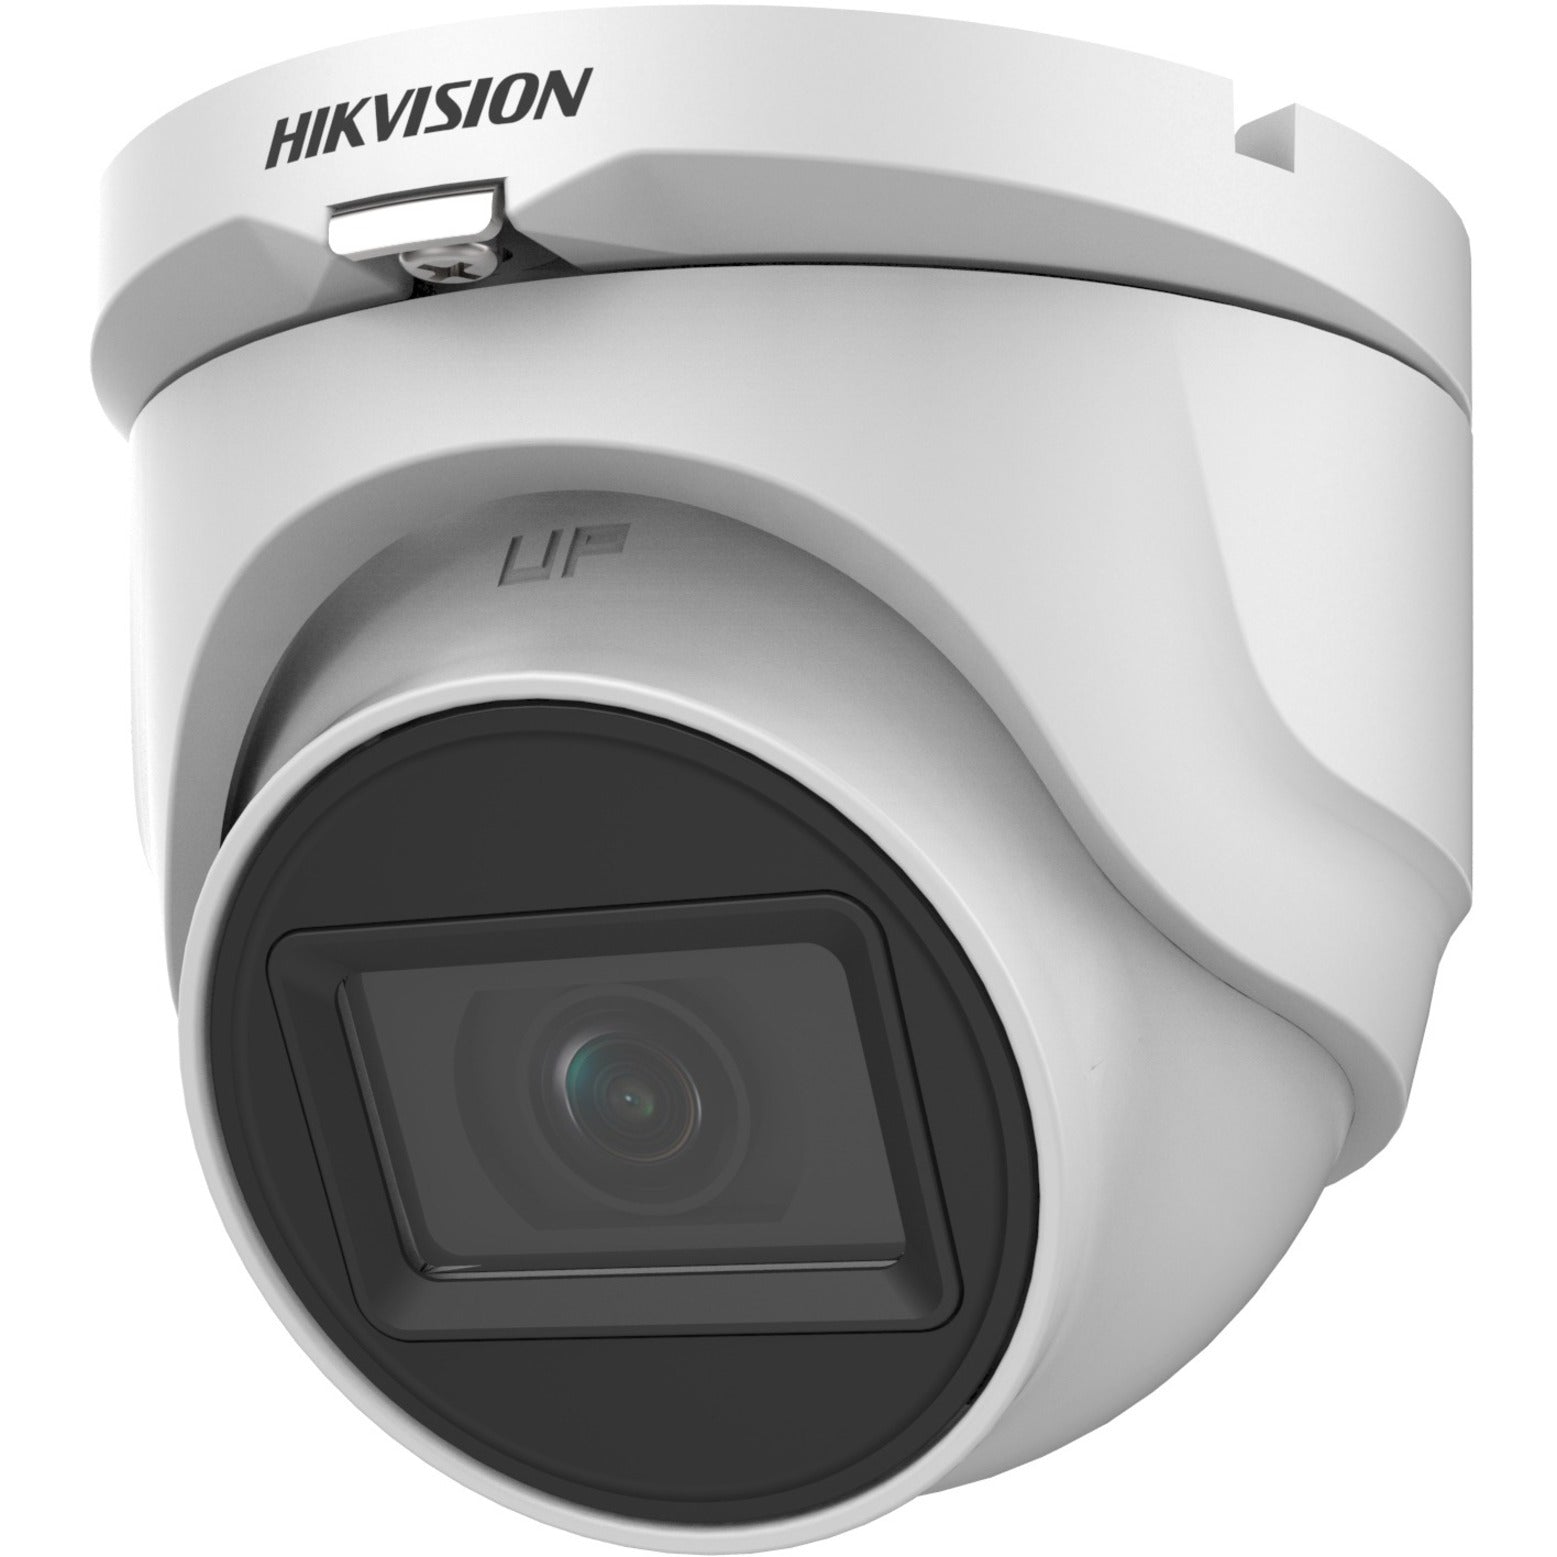 Hikvision DS2CE76H0TITMF2.8MM 5 MP Outdoor Turret Camera, 30m IR, 2.8mm Lens